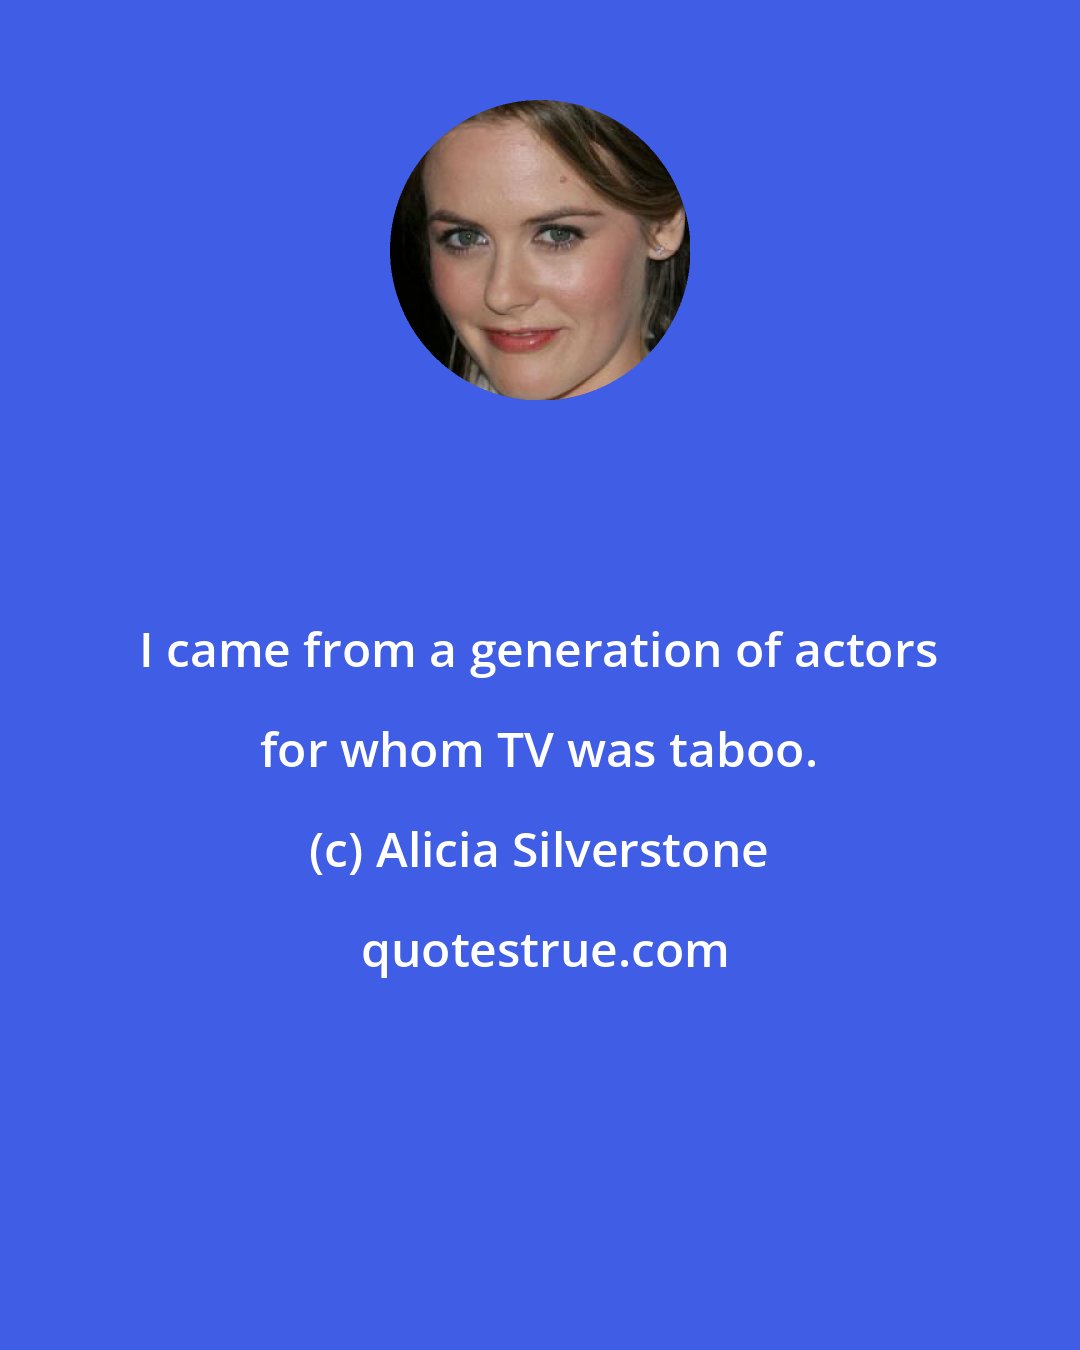 Alicia Silverstone: I came from a generation of actors for whom TV was taboo.